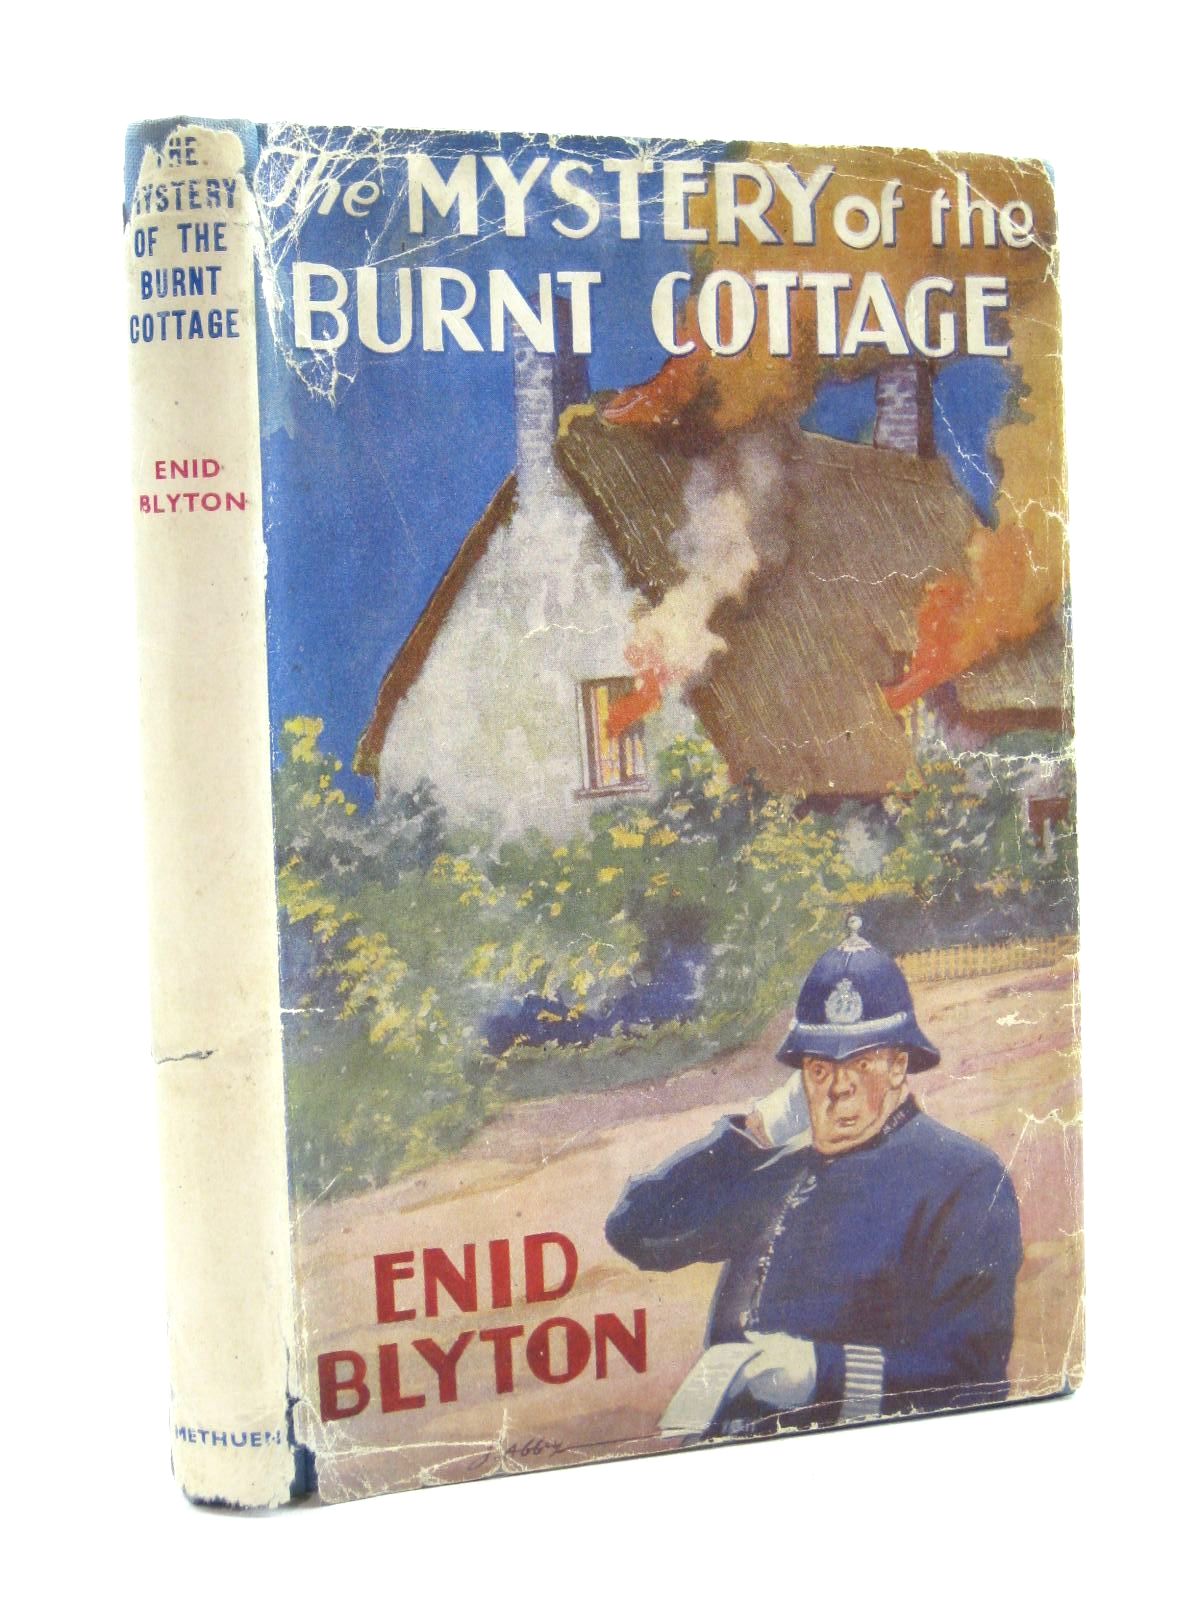 Photo of THE MYSTERY OF THE BURNT COTTAGE written by Blyton, Enid illustrated by Abbey, J. published by Methuen & Co. Ltd. (STOCK CODE: 1315317)  for sale by Stella & Rose's Books